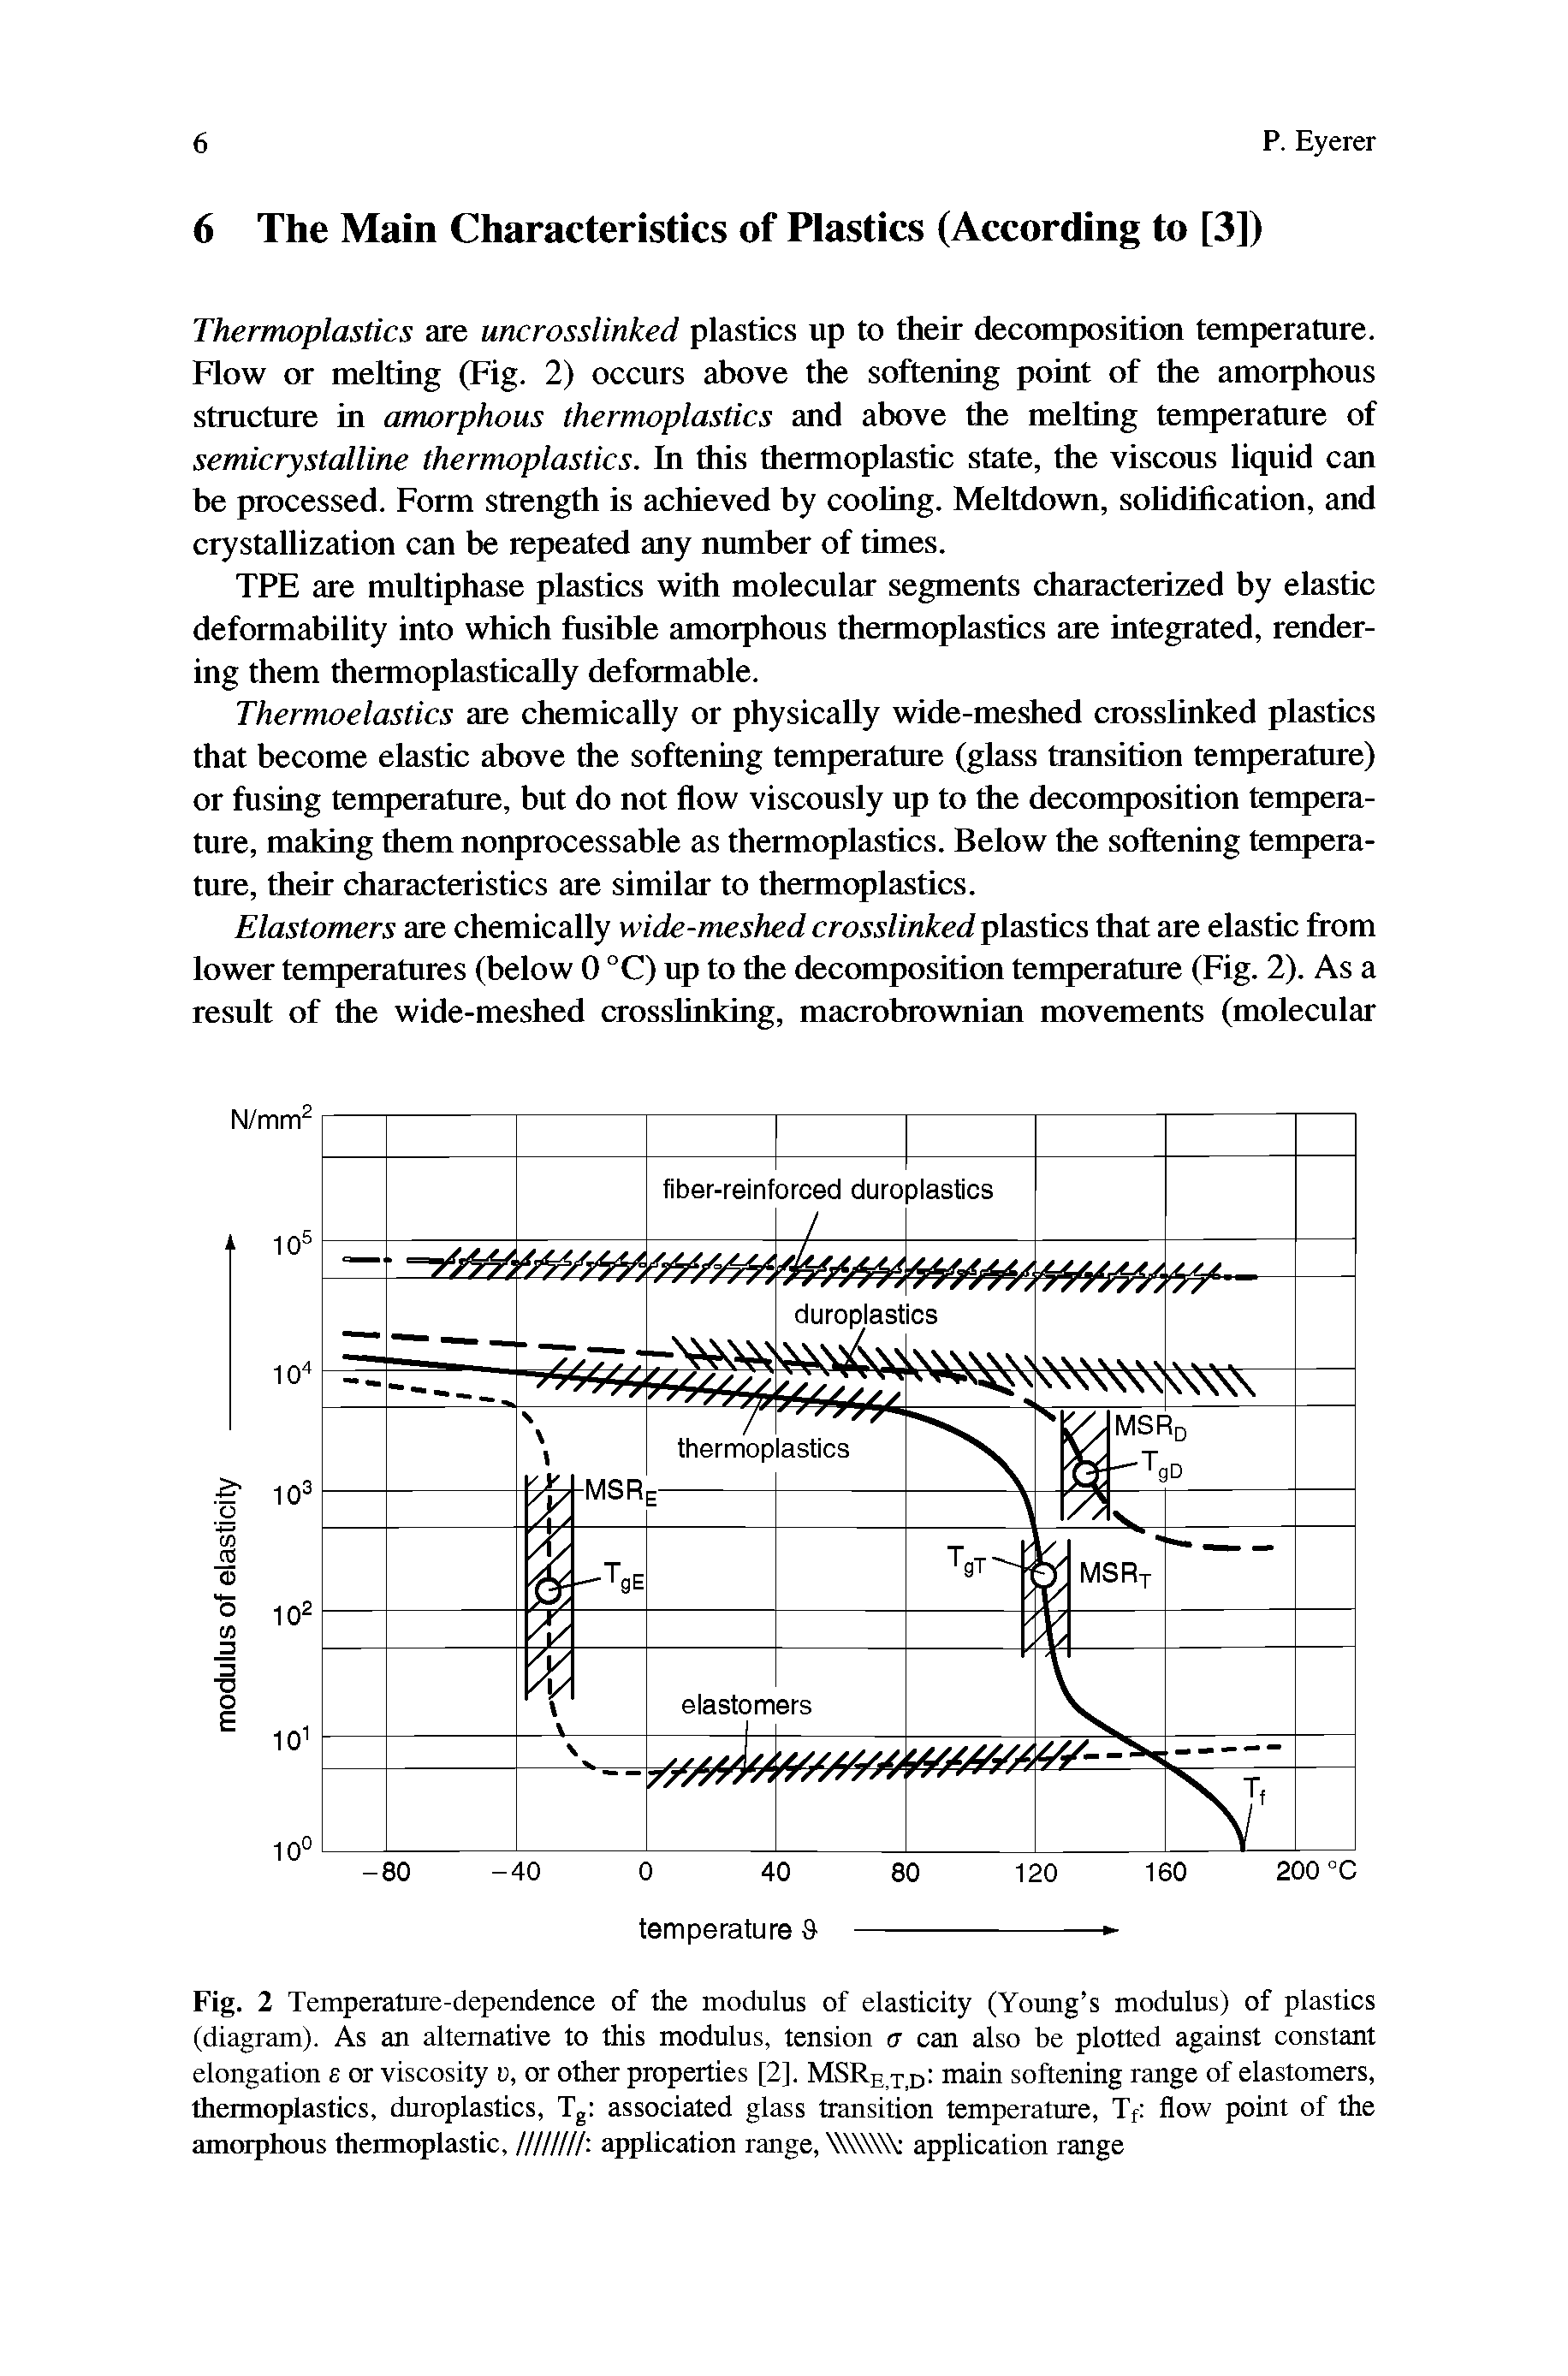 Fig. 2 Temperature-dependence of the modulus of elasticity (Young s modulus) of plastics (diagram). As an alternative to this modulus, tension a can also be plotted against constant elongation e or viscosity i), or other properties [2]. MSRe x,d- main softening range of elastomers, thermoplastics, duroplastics, Tgt associated glass transition temperature, Tfi flow point of the amorphous thermoplastic, //////// application range, application range...